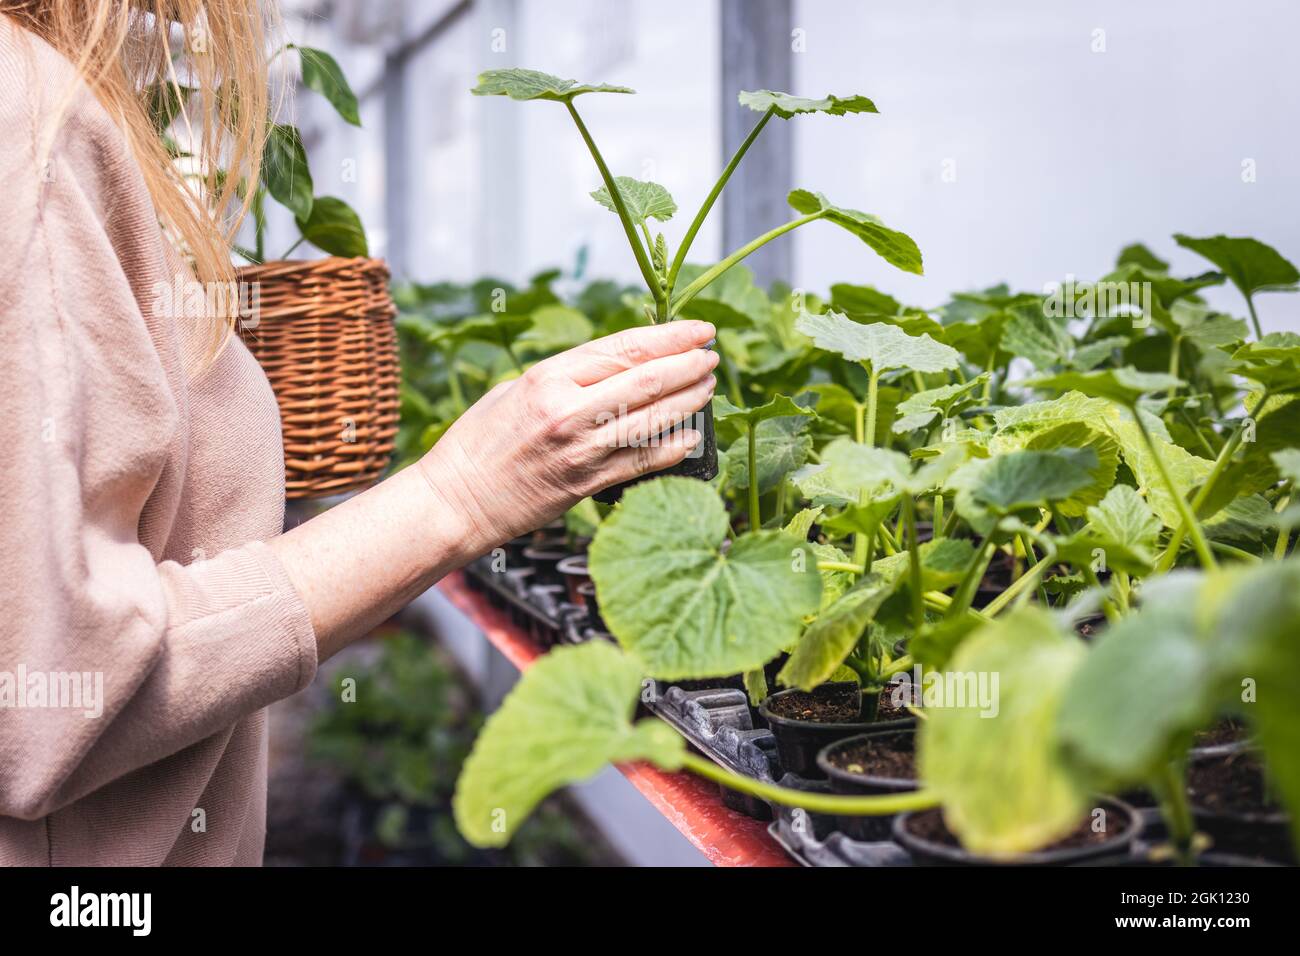 Woman shopping zucchini seedling at plant nursery. Customer choosing and buying vegetable plants from organic farm greenhouse Stock Photo